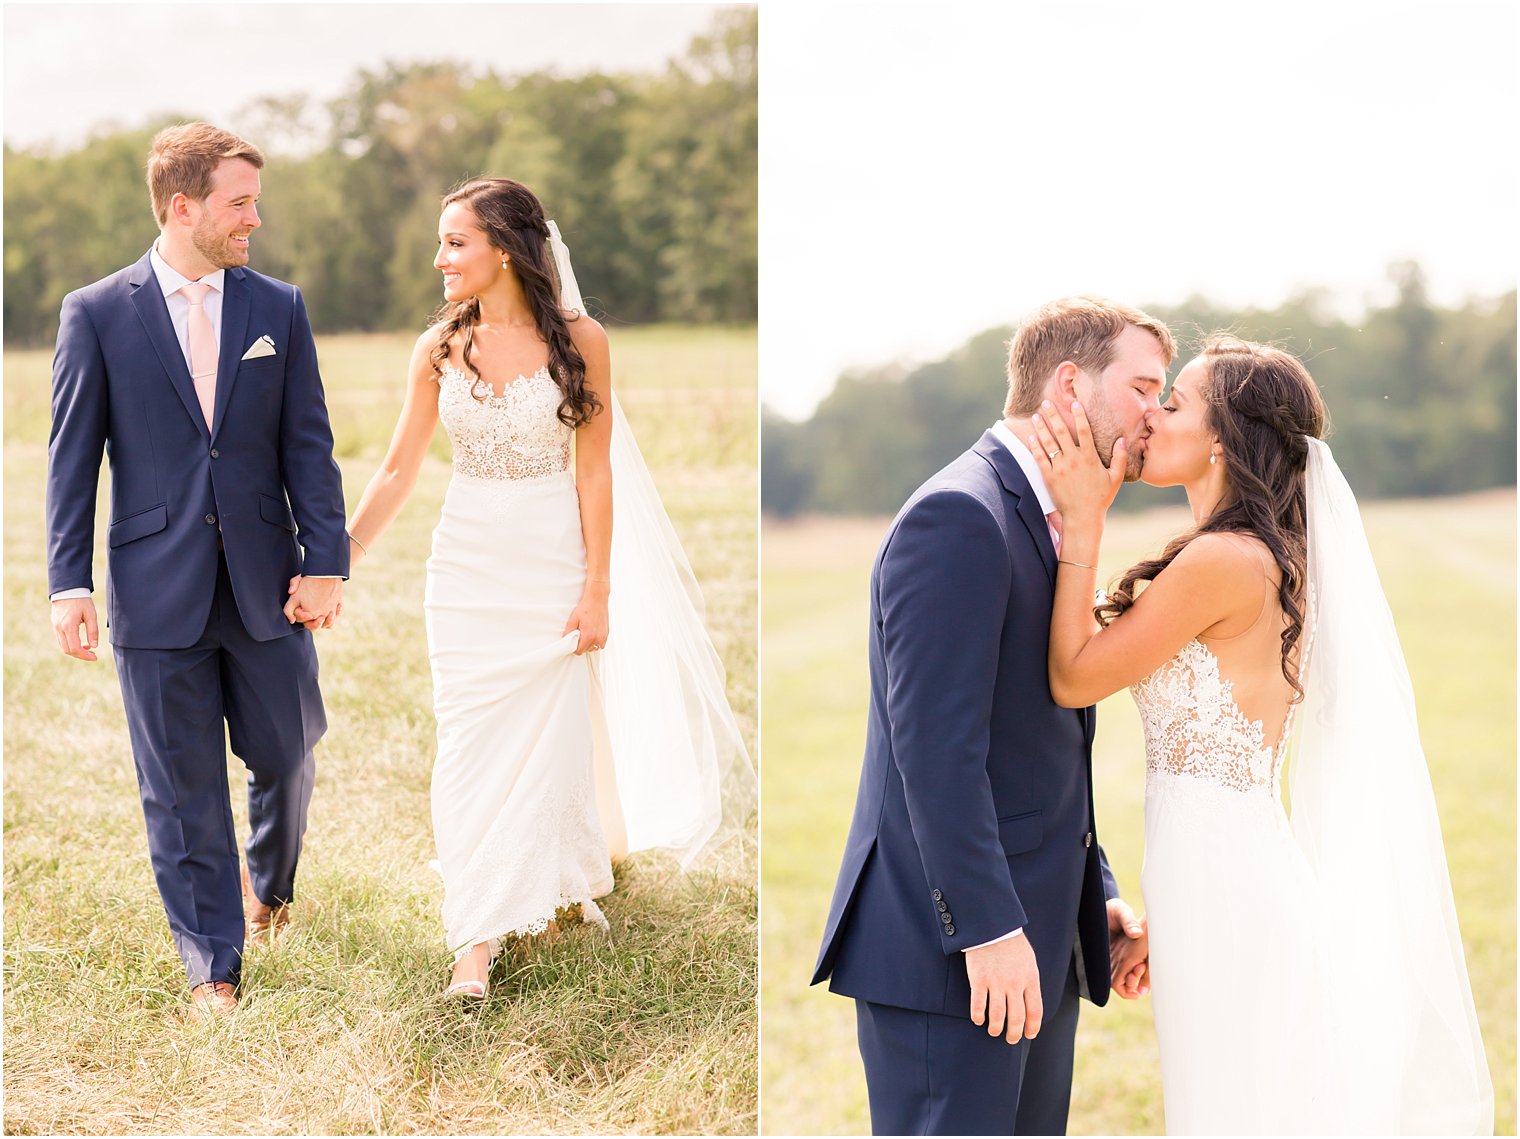 Portraits of bride and groom on field